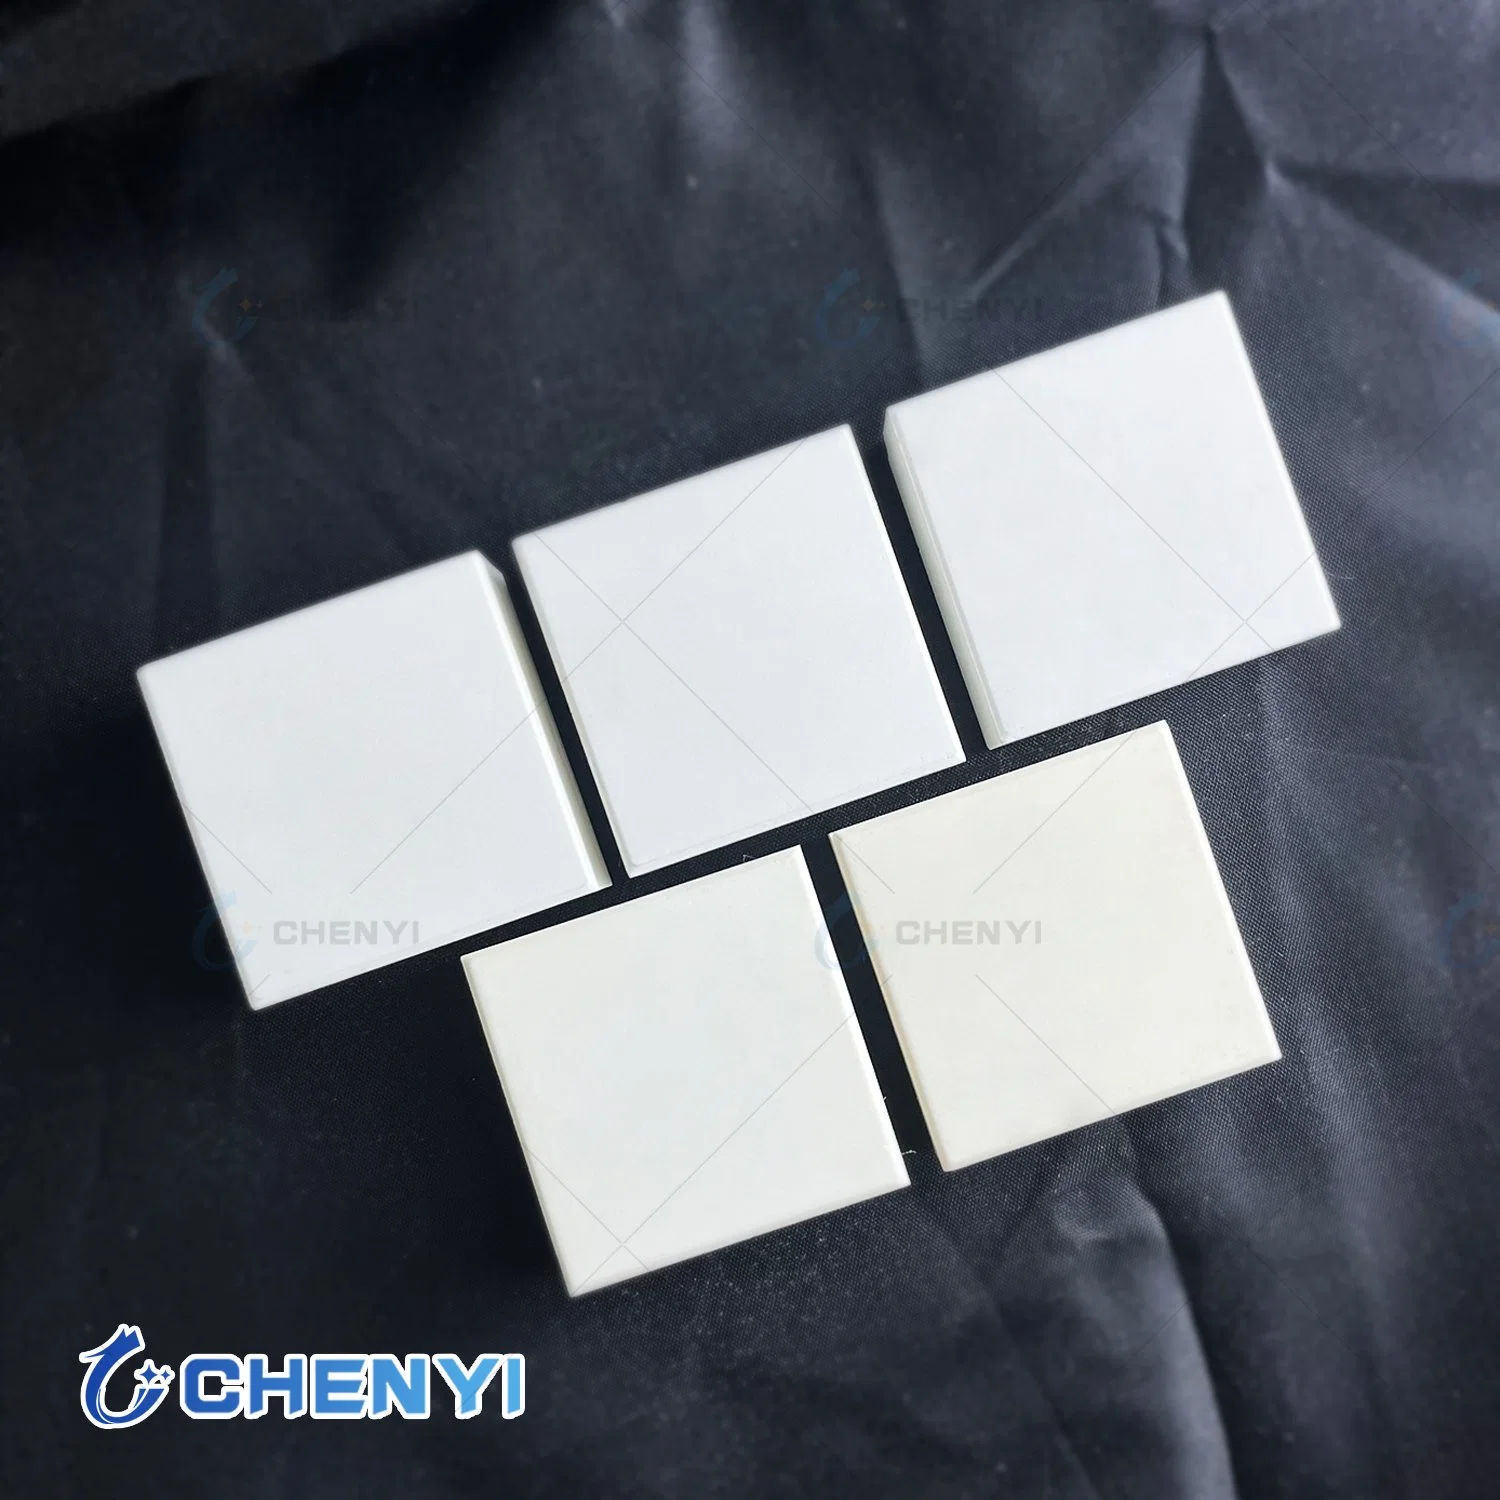 Alumina Ceramic Tiles Wear Resistant Lining for Heavy Industrial Wear Protection Liners